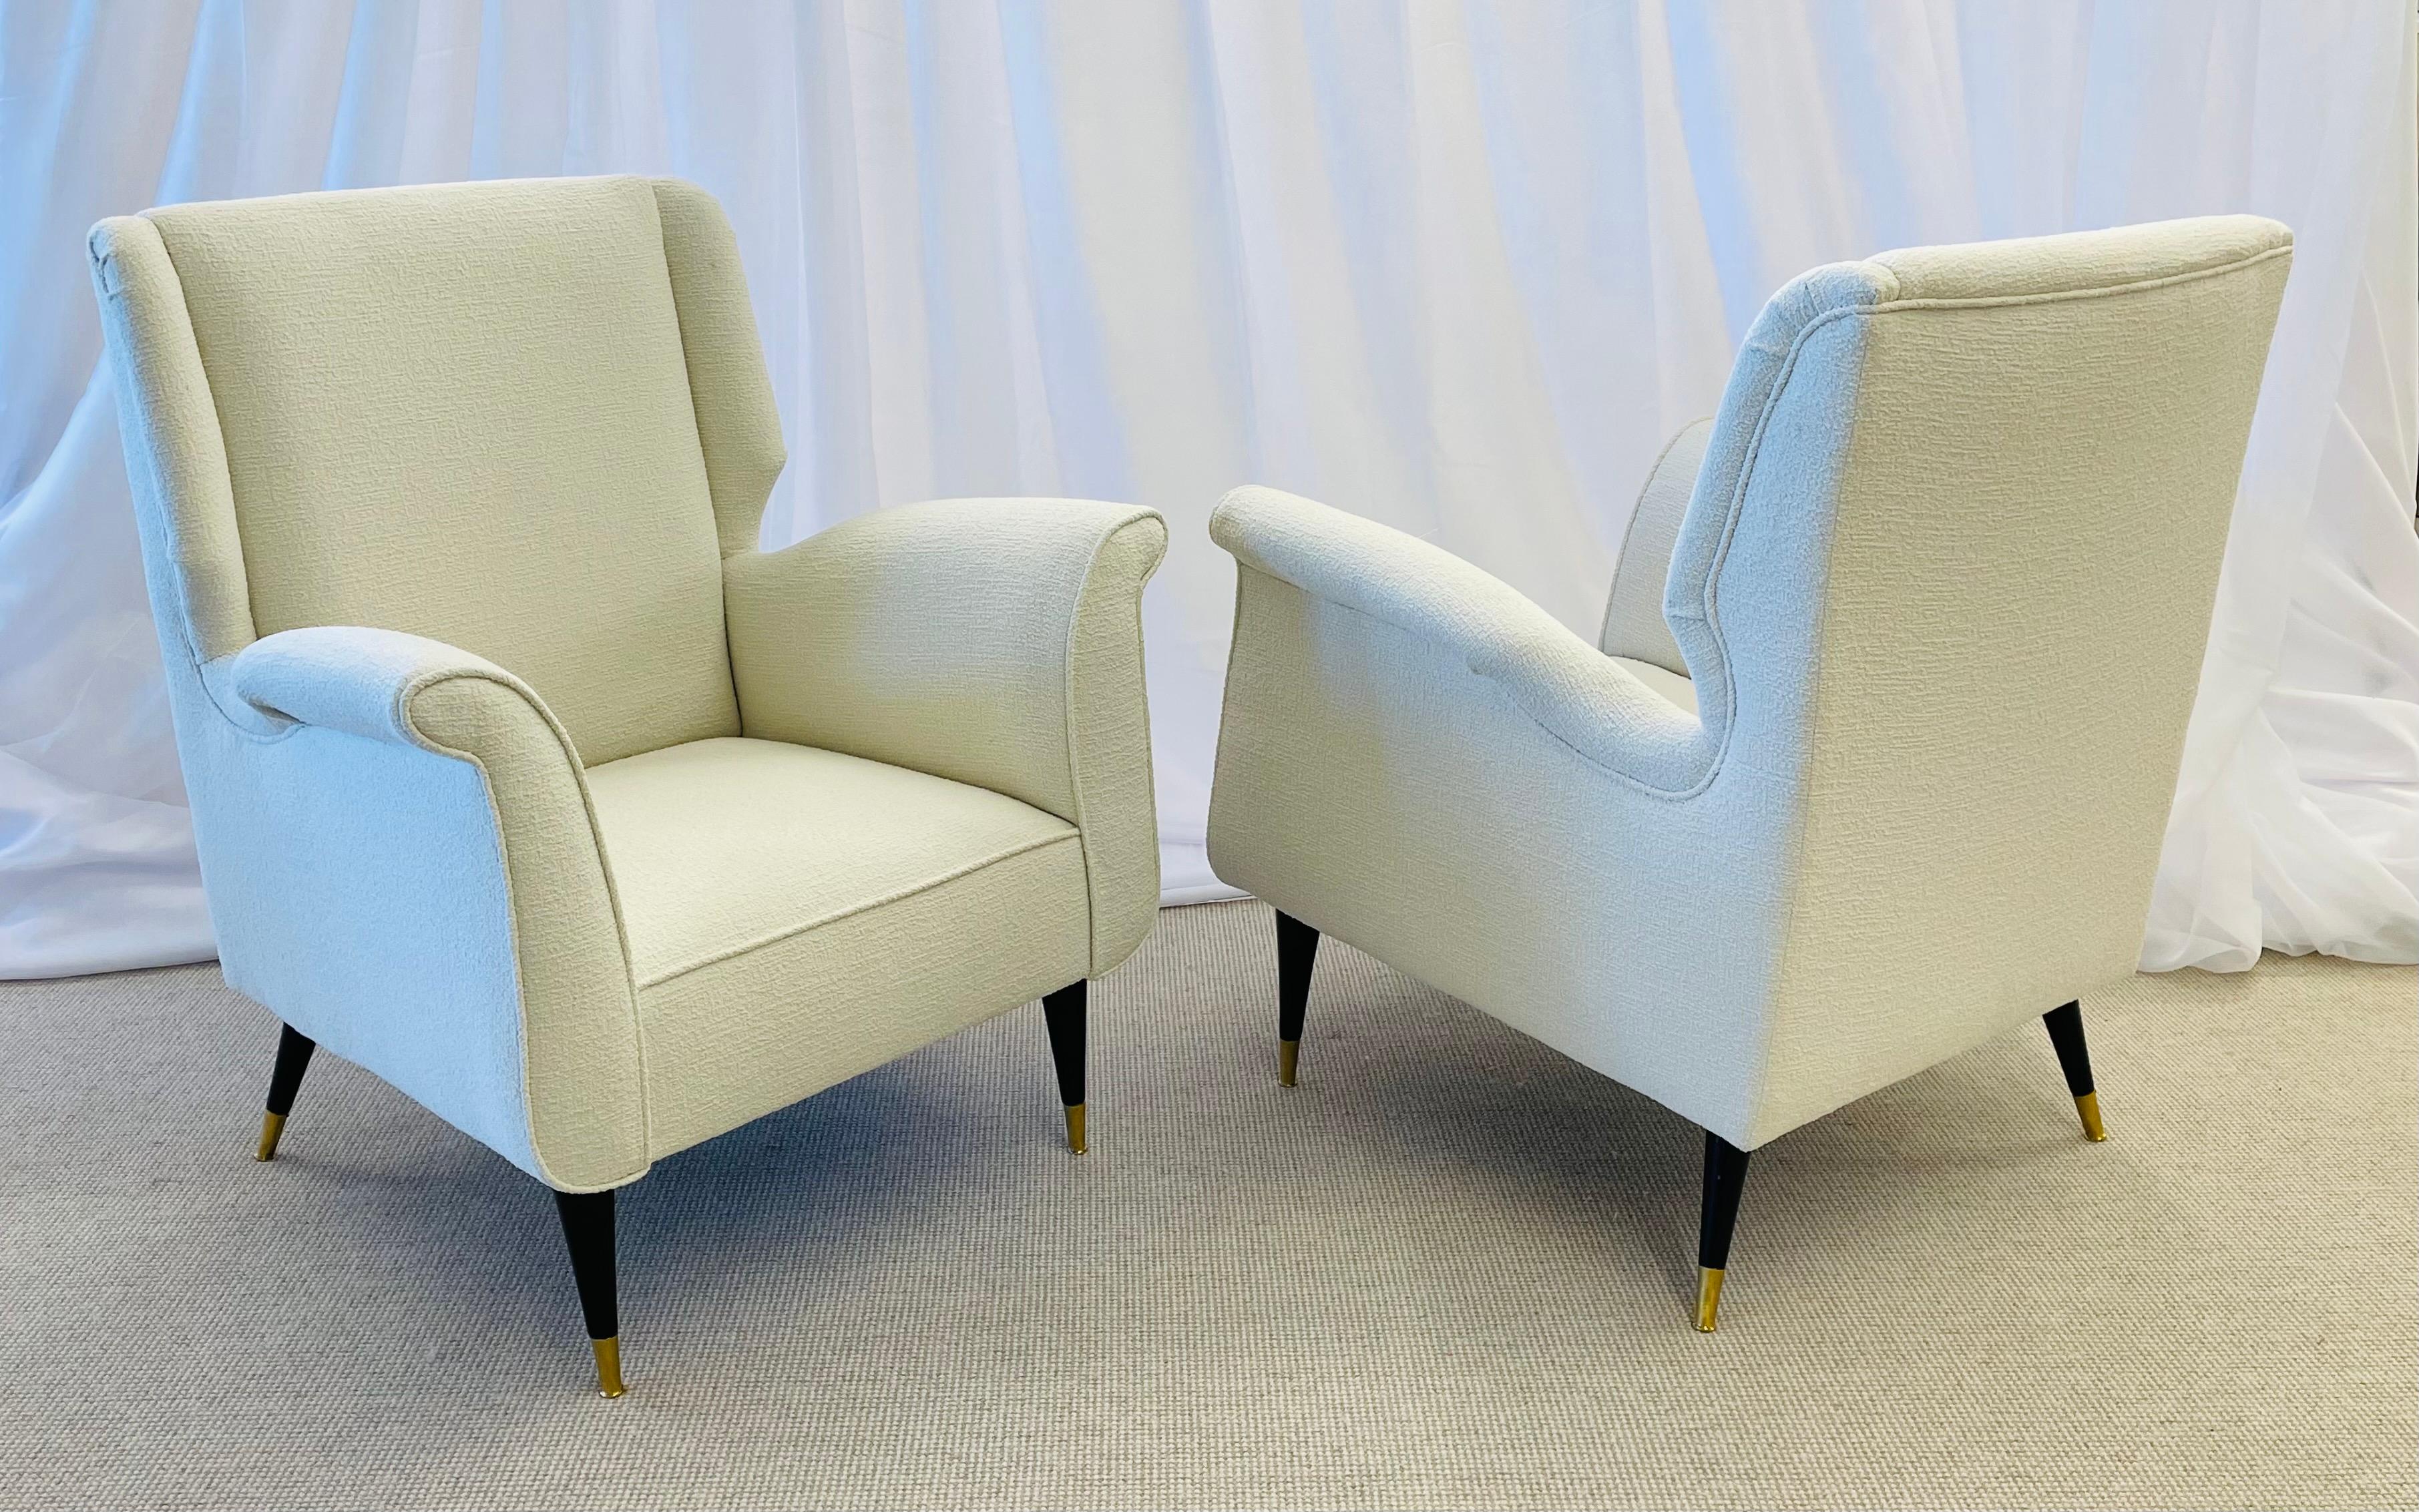 Mid-Century Modern Gio Ponti Style Armchairs, Wingback Chairs, Pair in Kravet Bouclé
 
These finely detailed sleek and stylish armchairs depict this iconic designer’s style for flair and simplicity at his highest level. The tapering mahogany legs